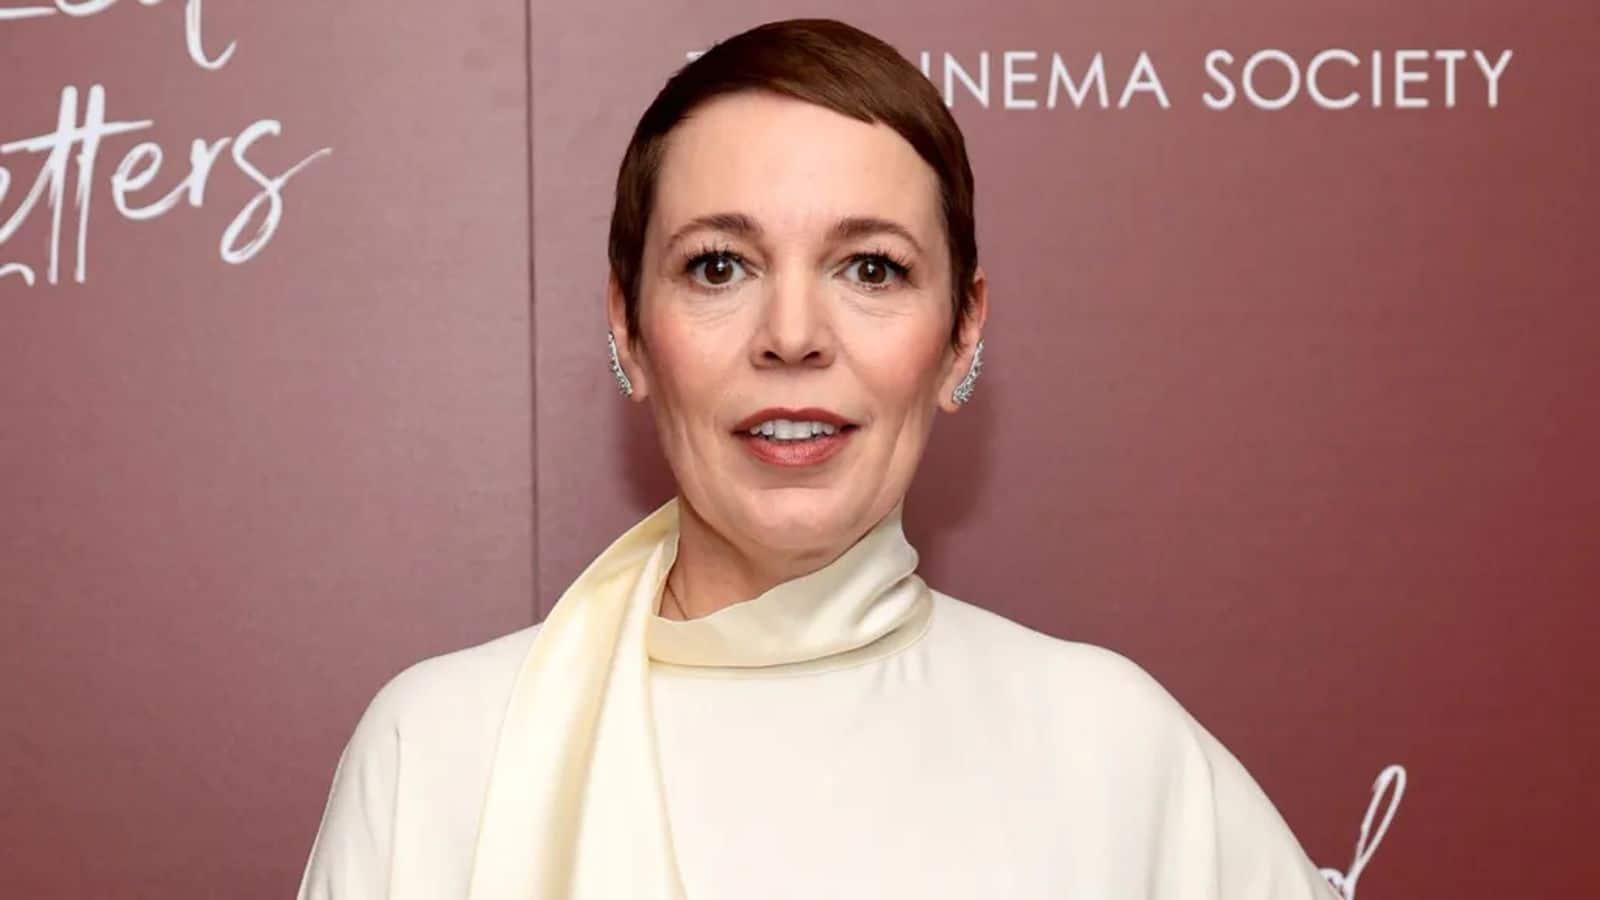 'If I was Oliver': Olivia Colman criticizes Hollywood pay disparity